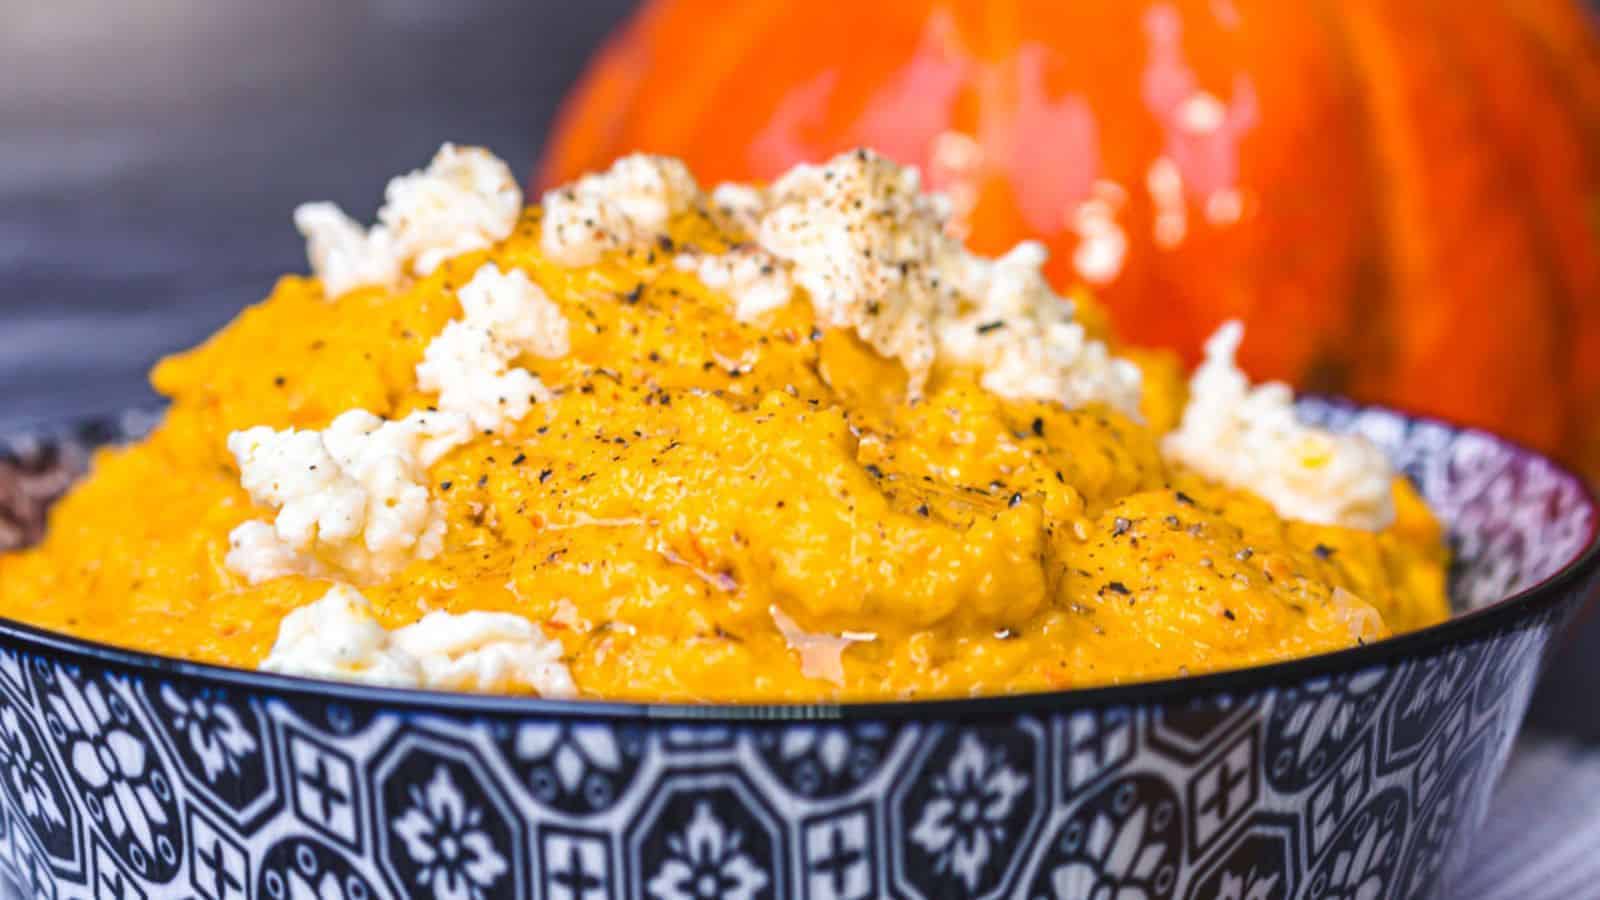 21 Cauliflower Recipes You'll Want to Make Right Away!